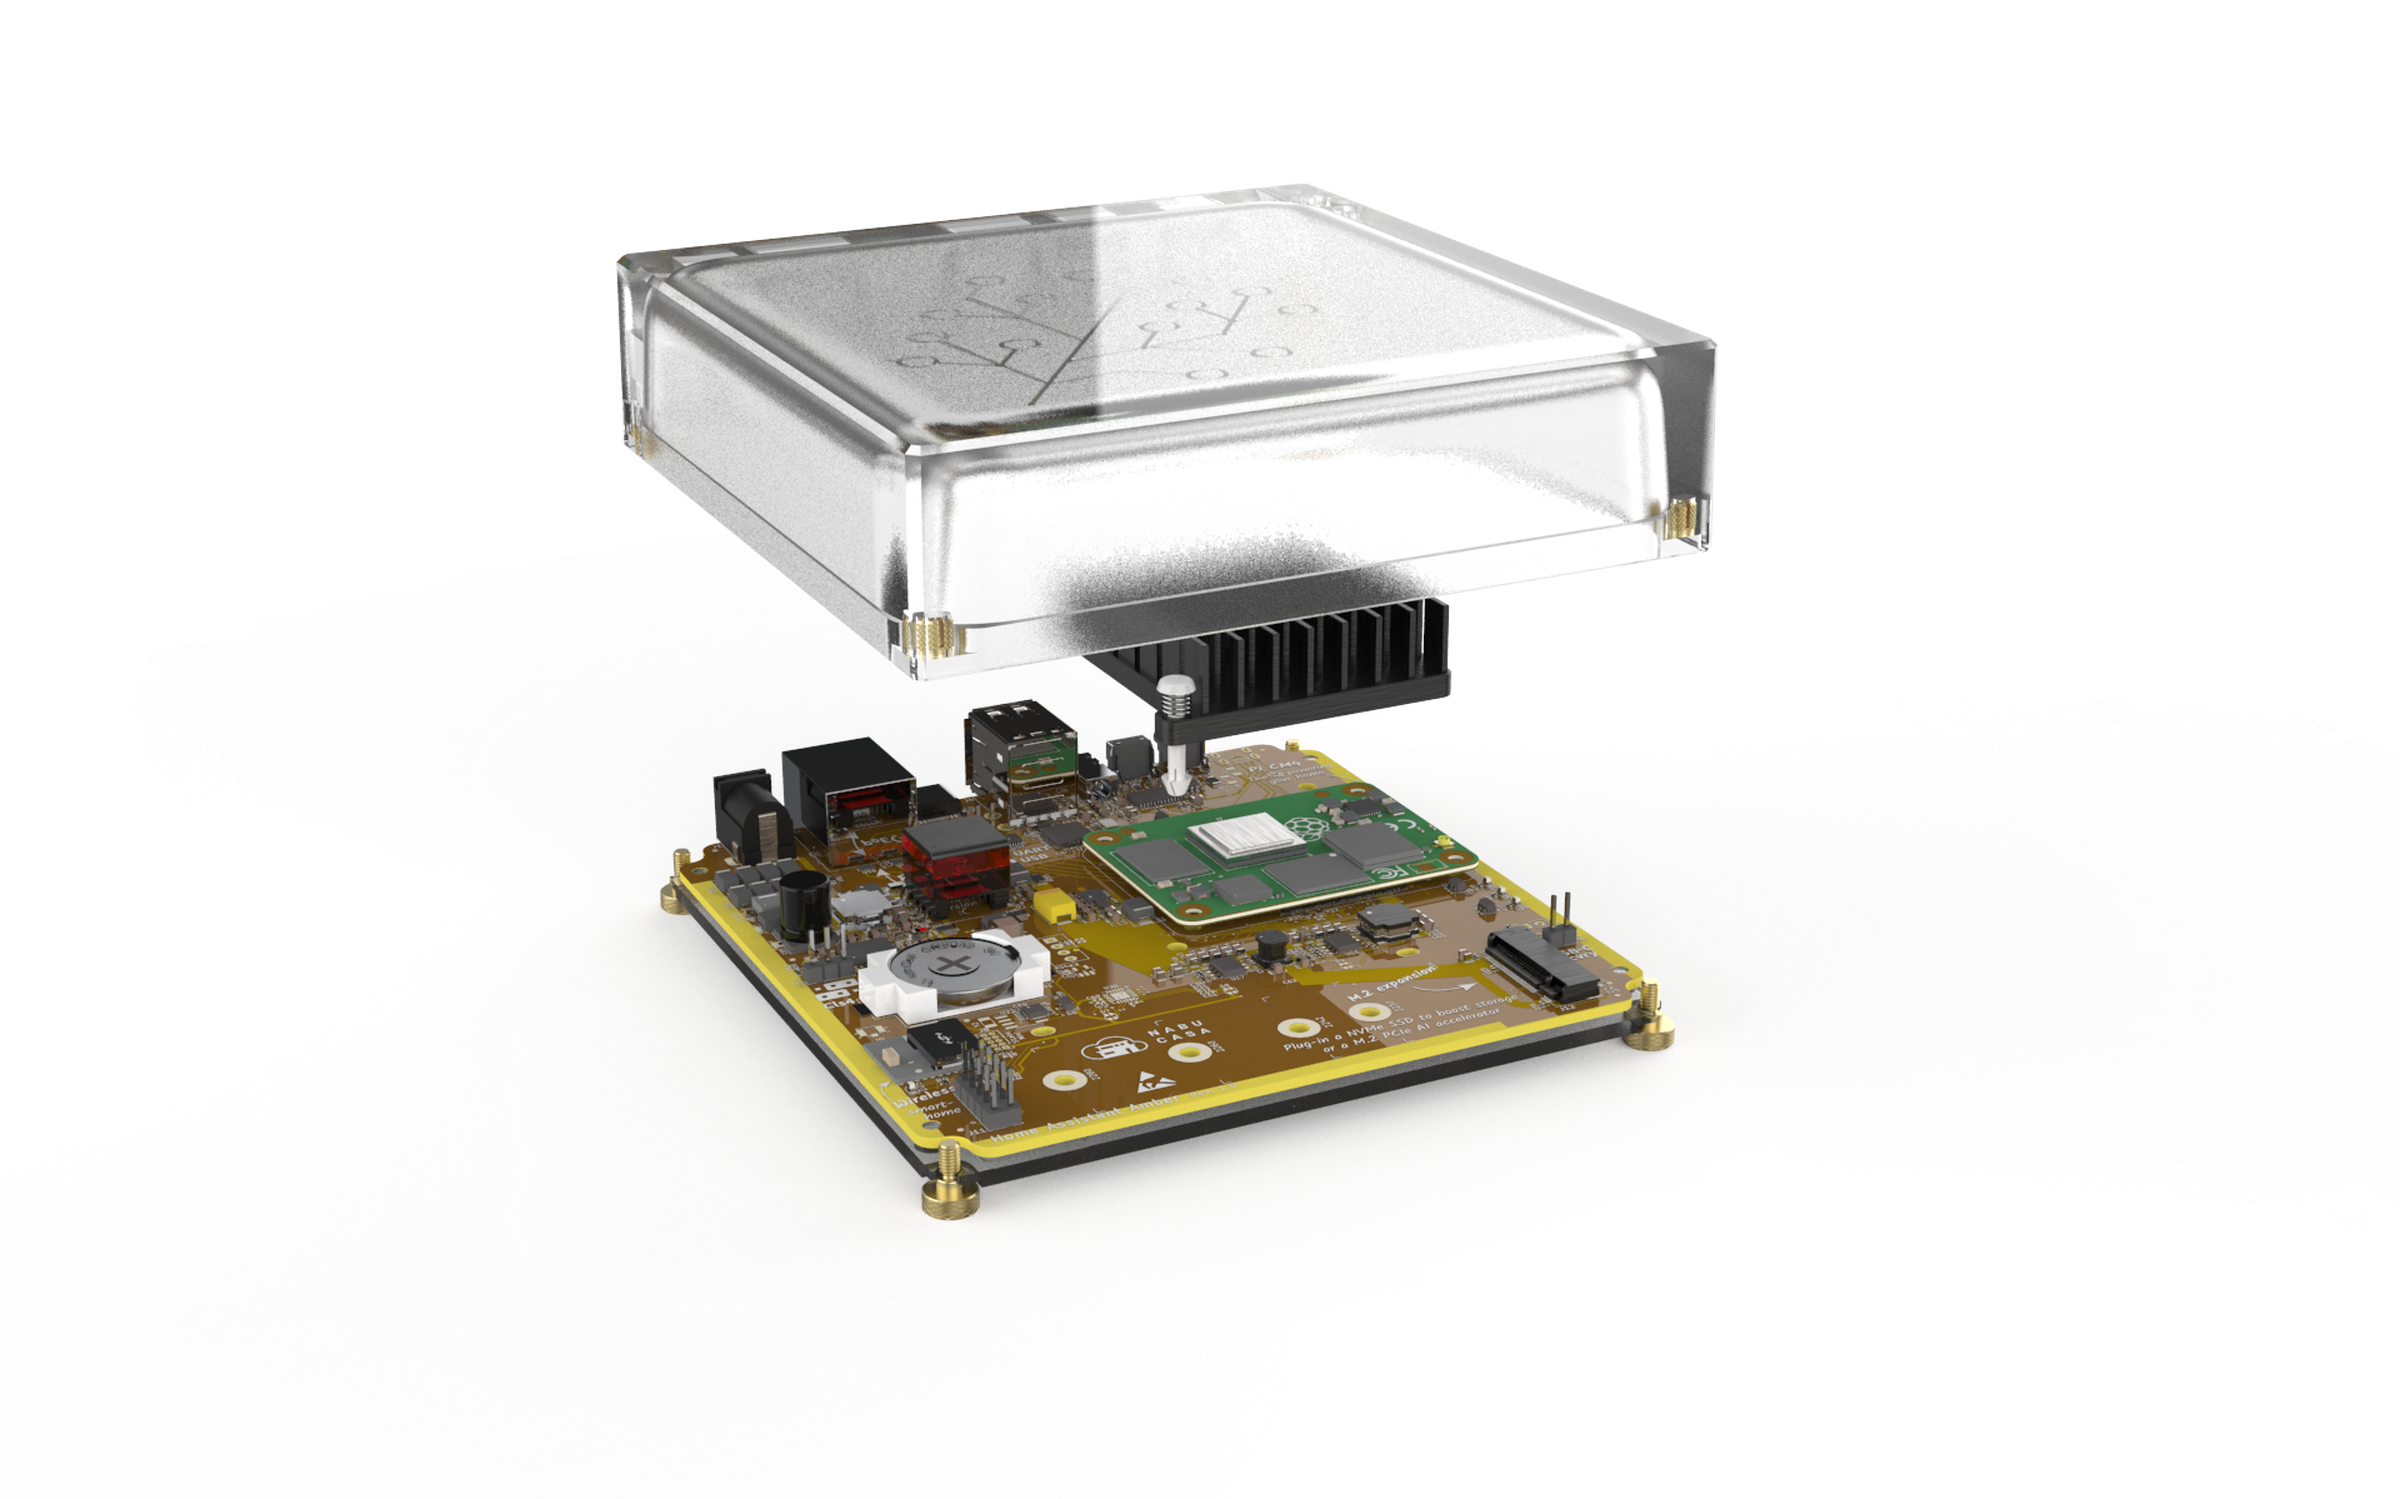 The Yellow Hub comes pre-assembled in a custom enclosure with a Raspberry Pi Compute Module 4 (CM4) and a heatsink for silent operation.